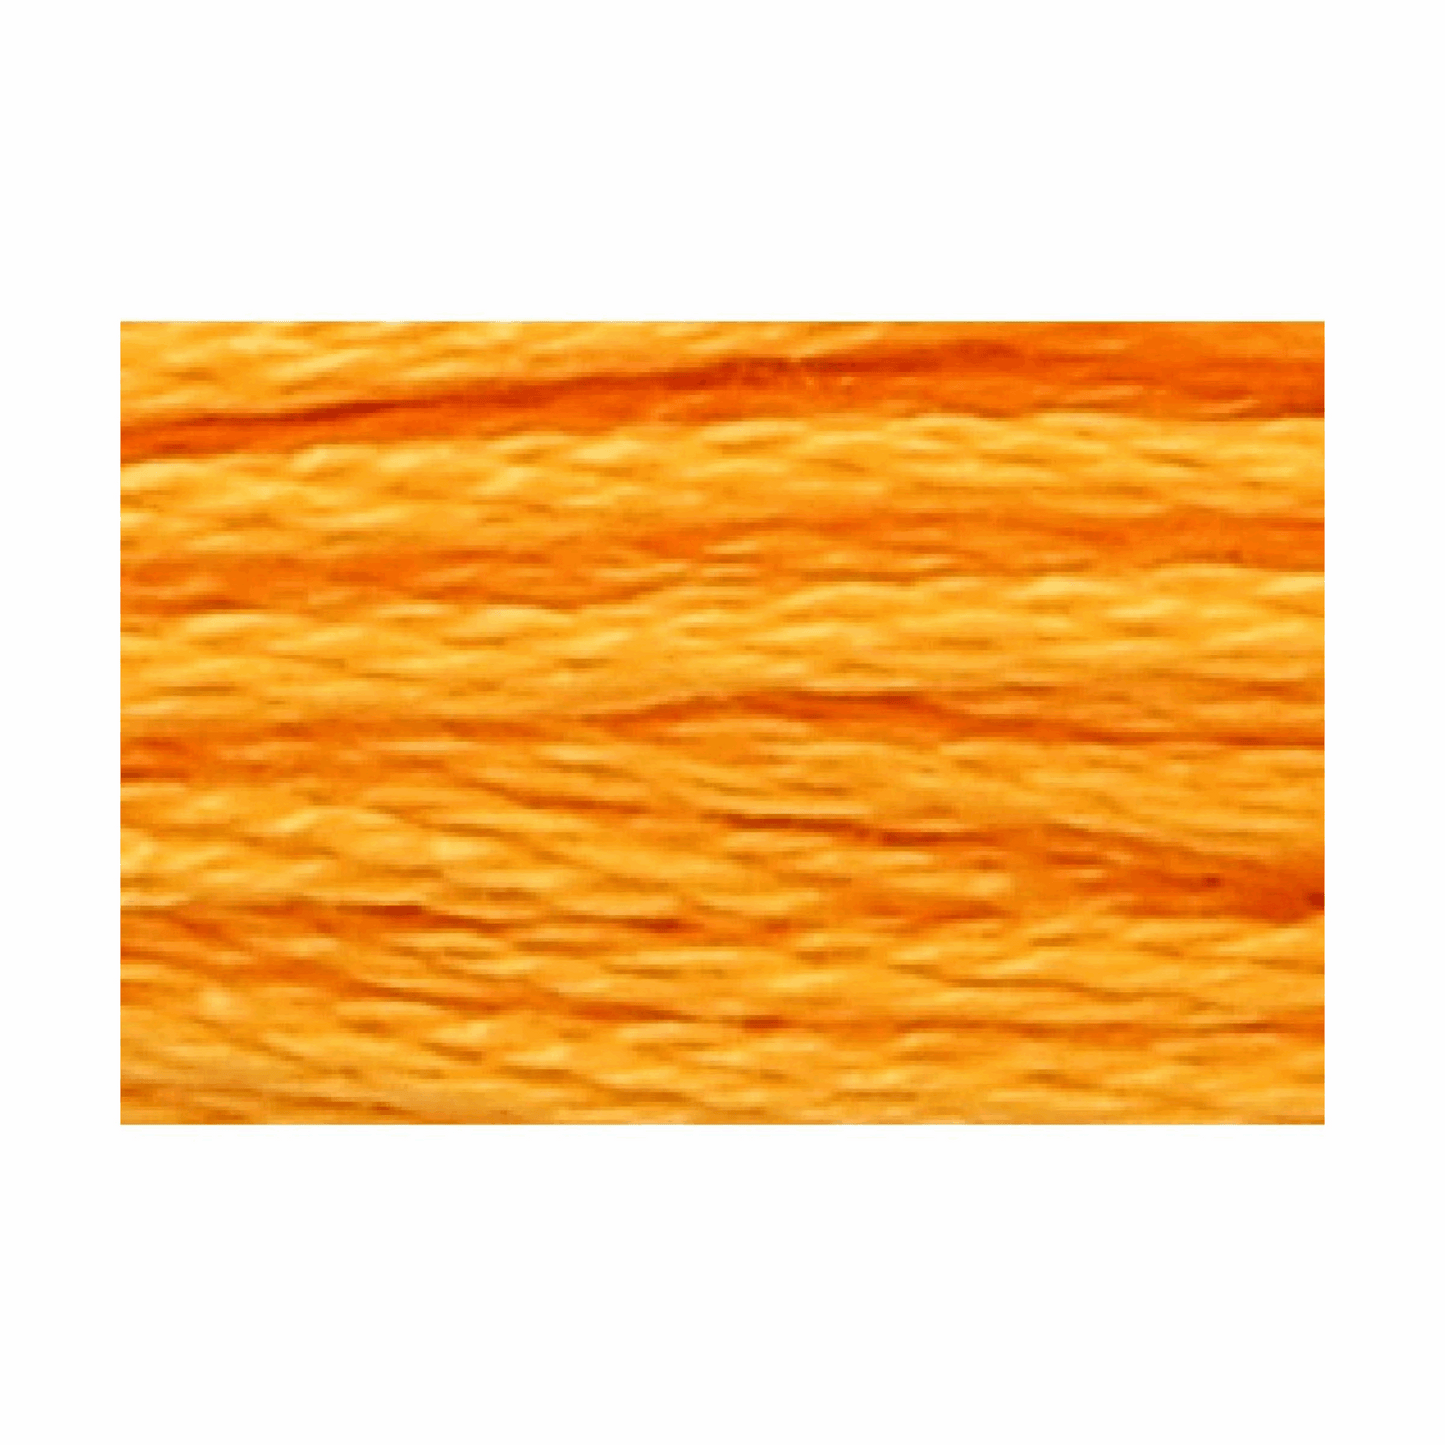 Anchor matt embroidery thread 10m, 5 times lightly twisted, color orange yellow 303